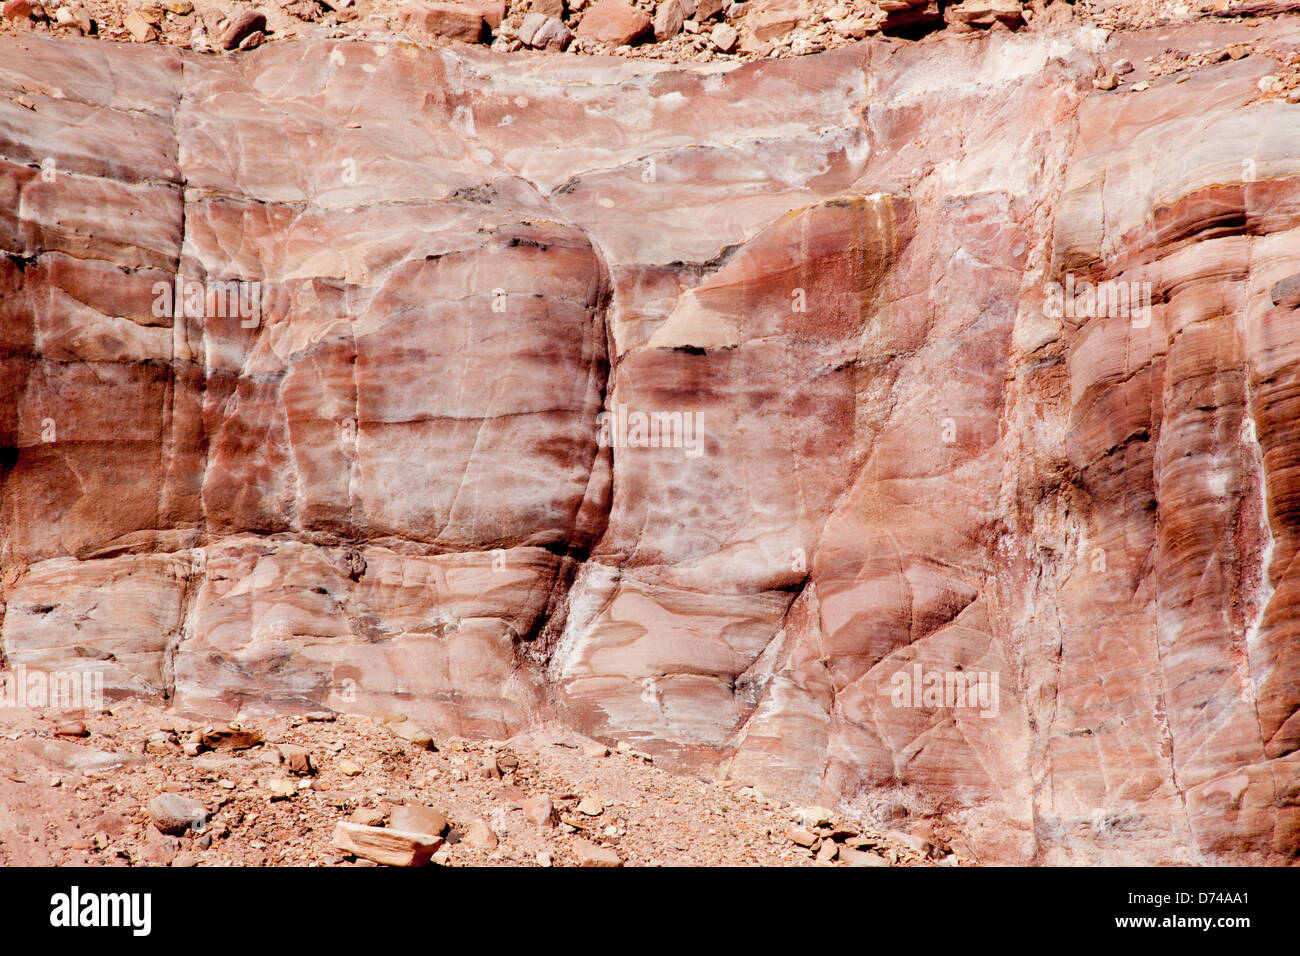 Abstract natural red stone, from Petra, Jordan, for background or where texture is needed Stock Photo